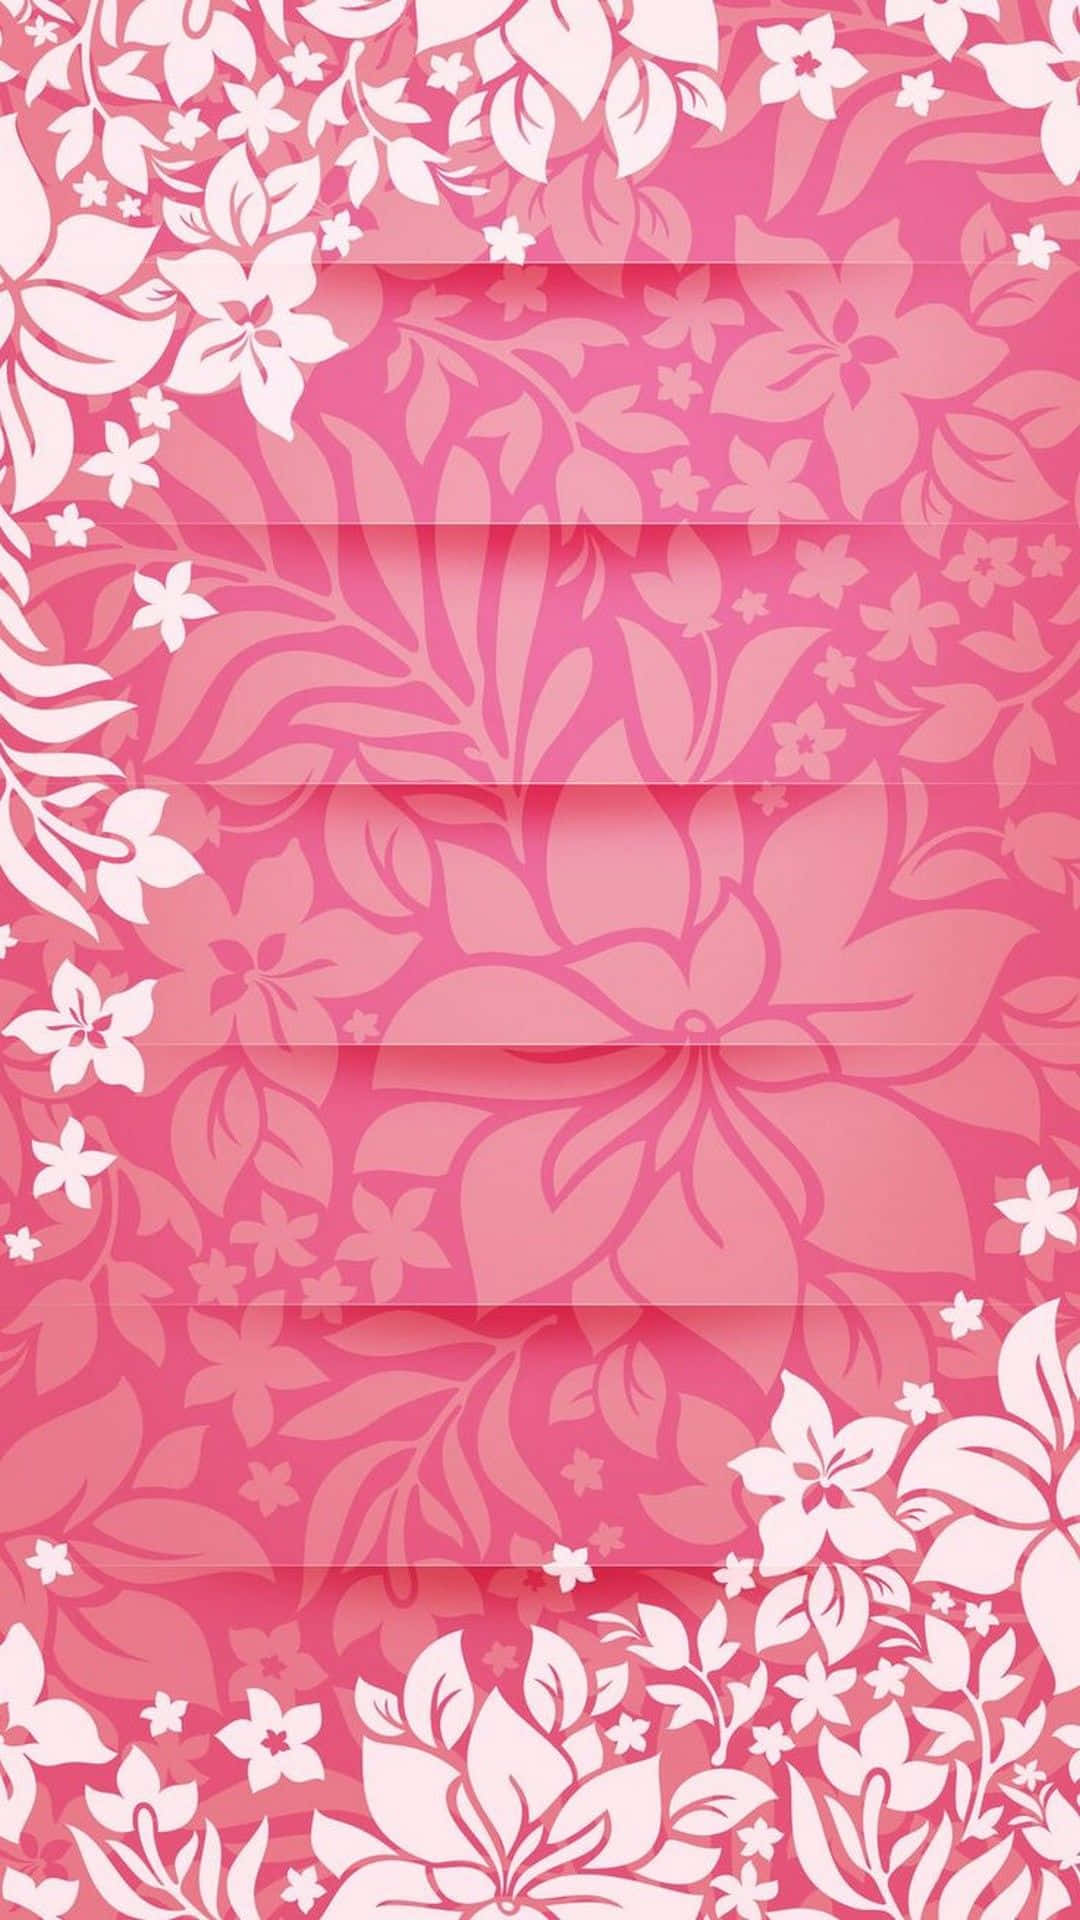 Floral Pink Girly Cute Picture